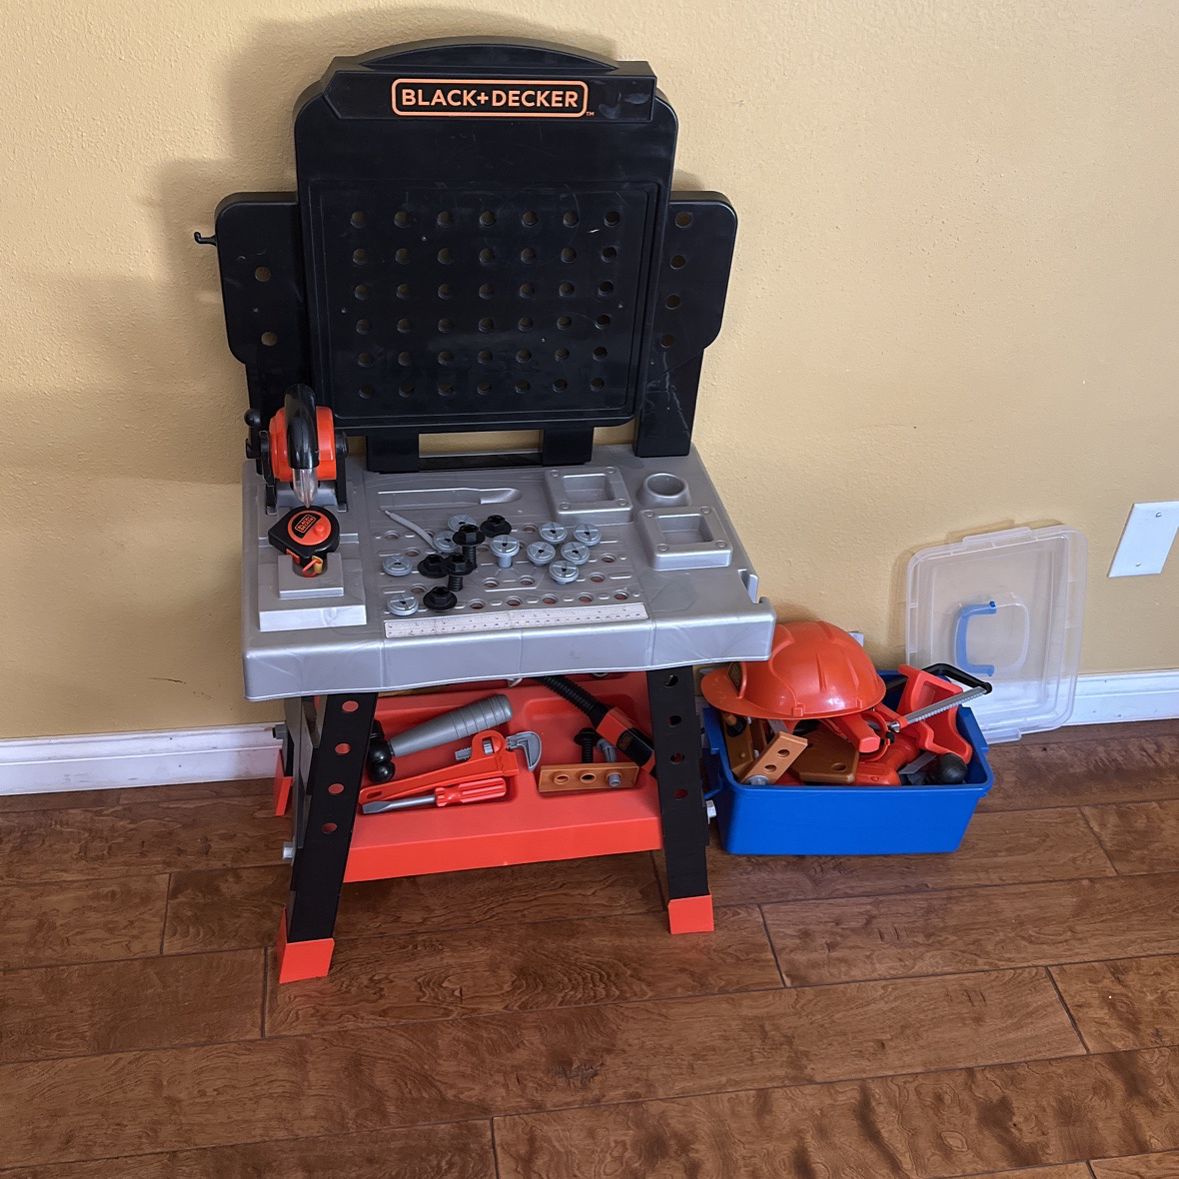 Black And Decker Toy Tool Set for Sale in Anaheim, CA - OfferUp